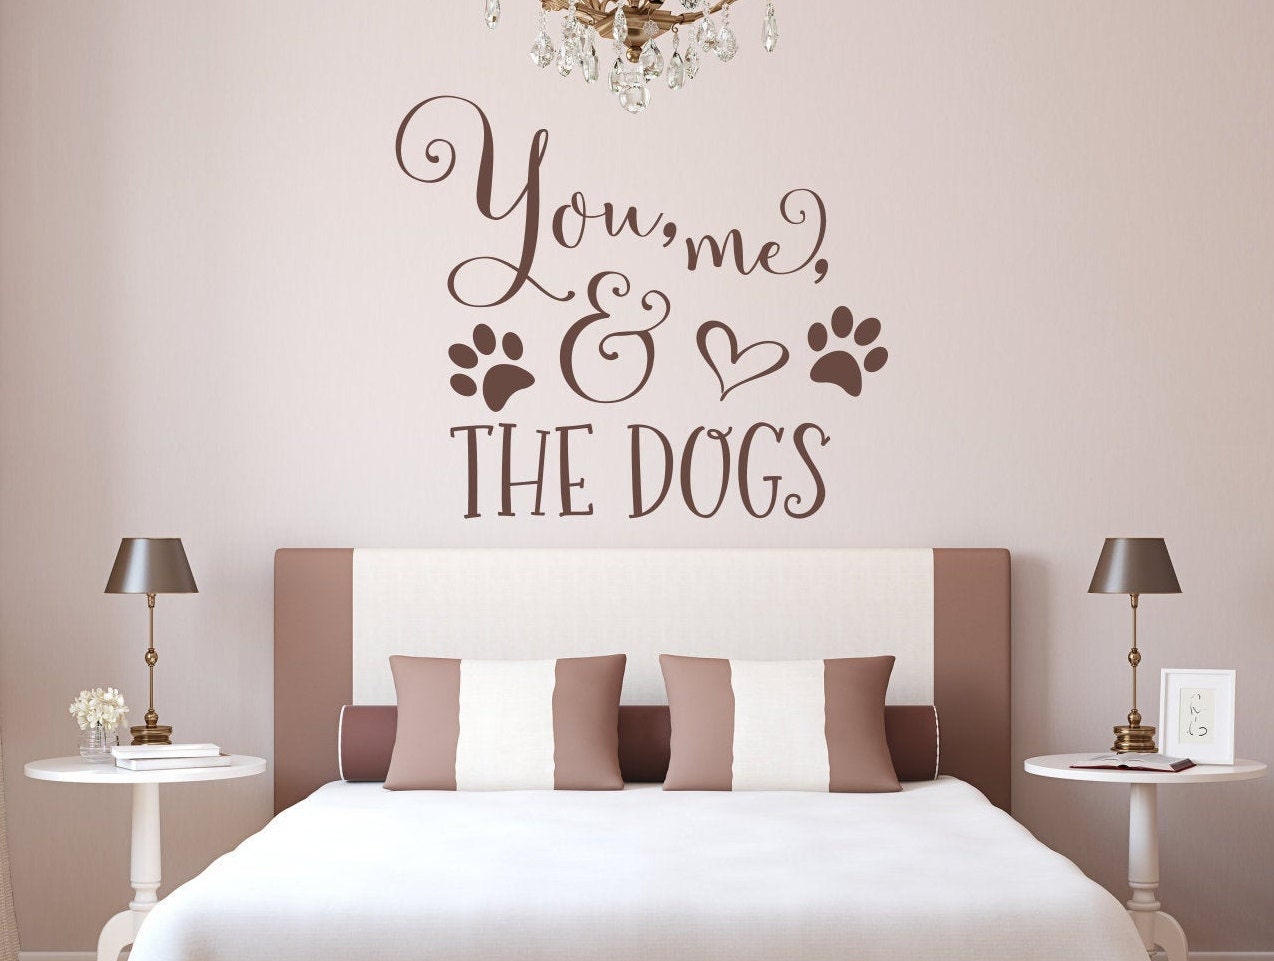 Details about Art Wall Stickers Bedroom Circle DIY Decal Decor Home Living ...